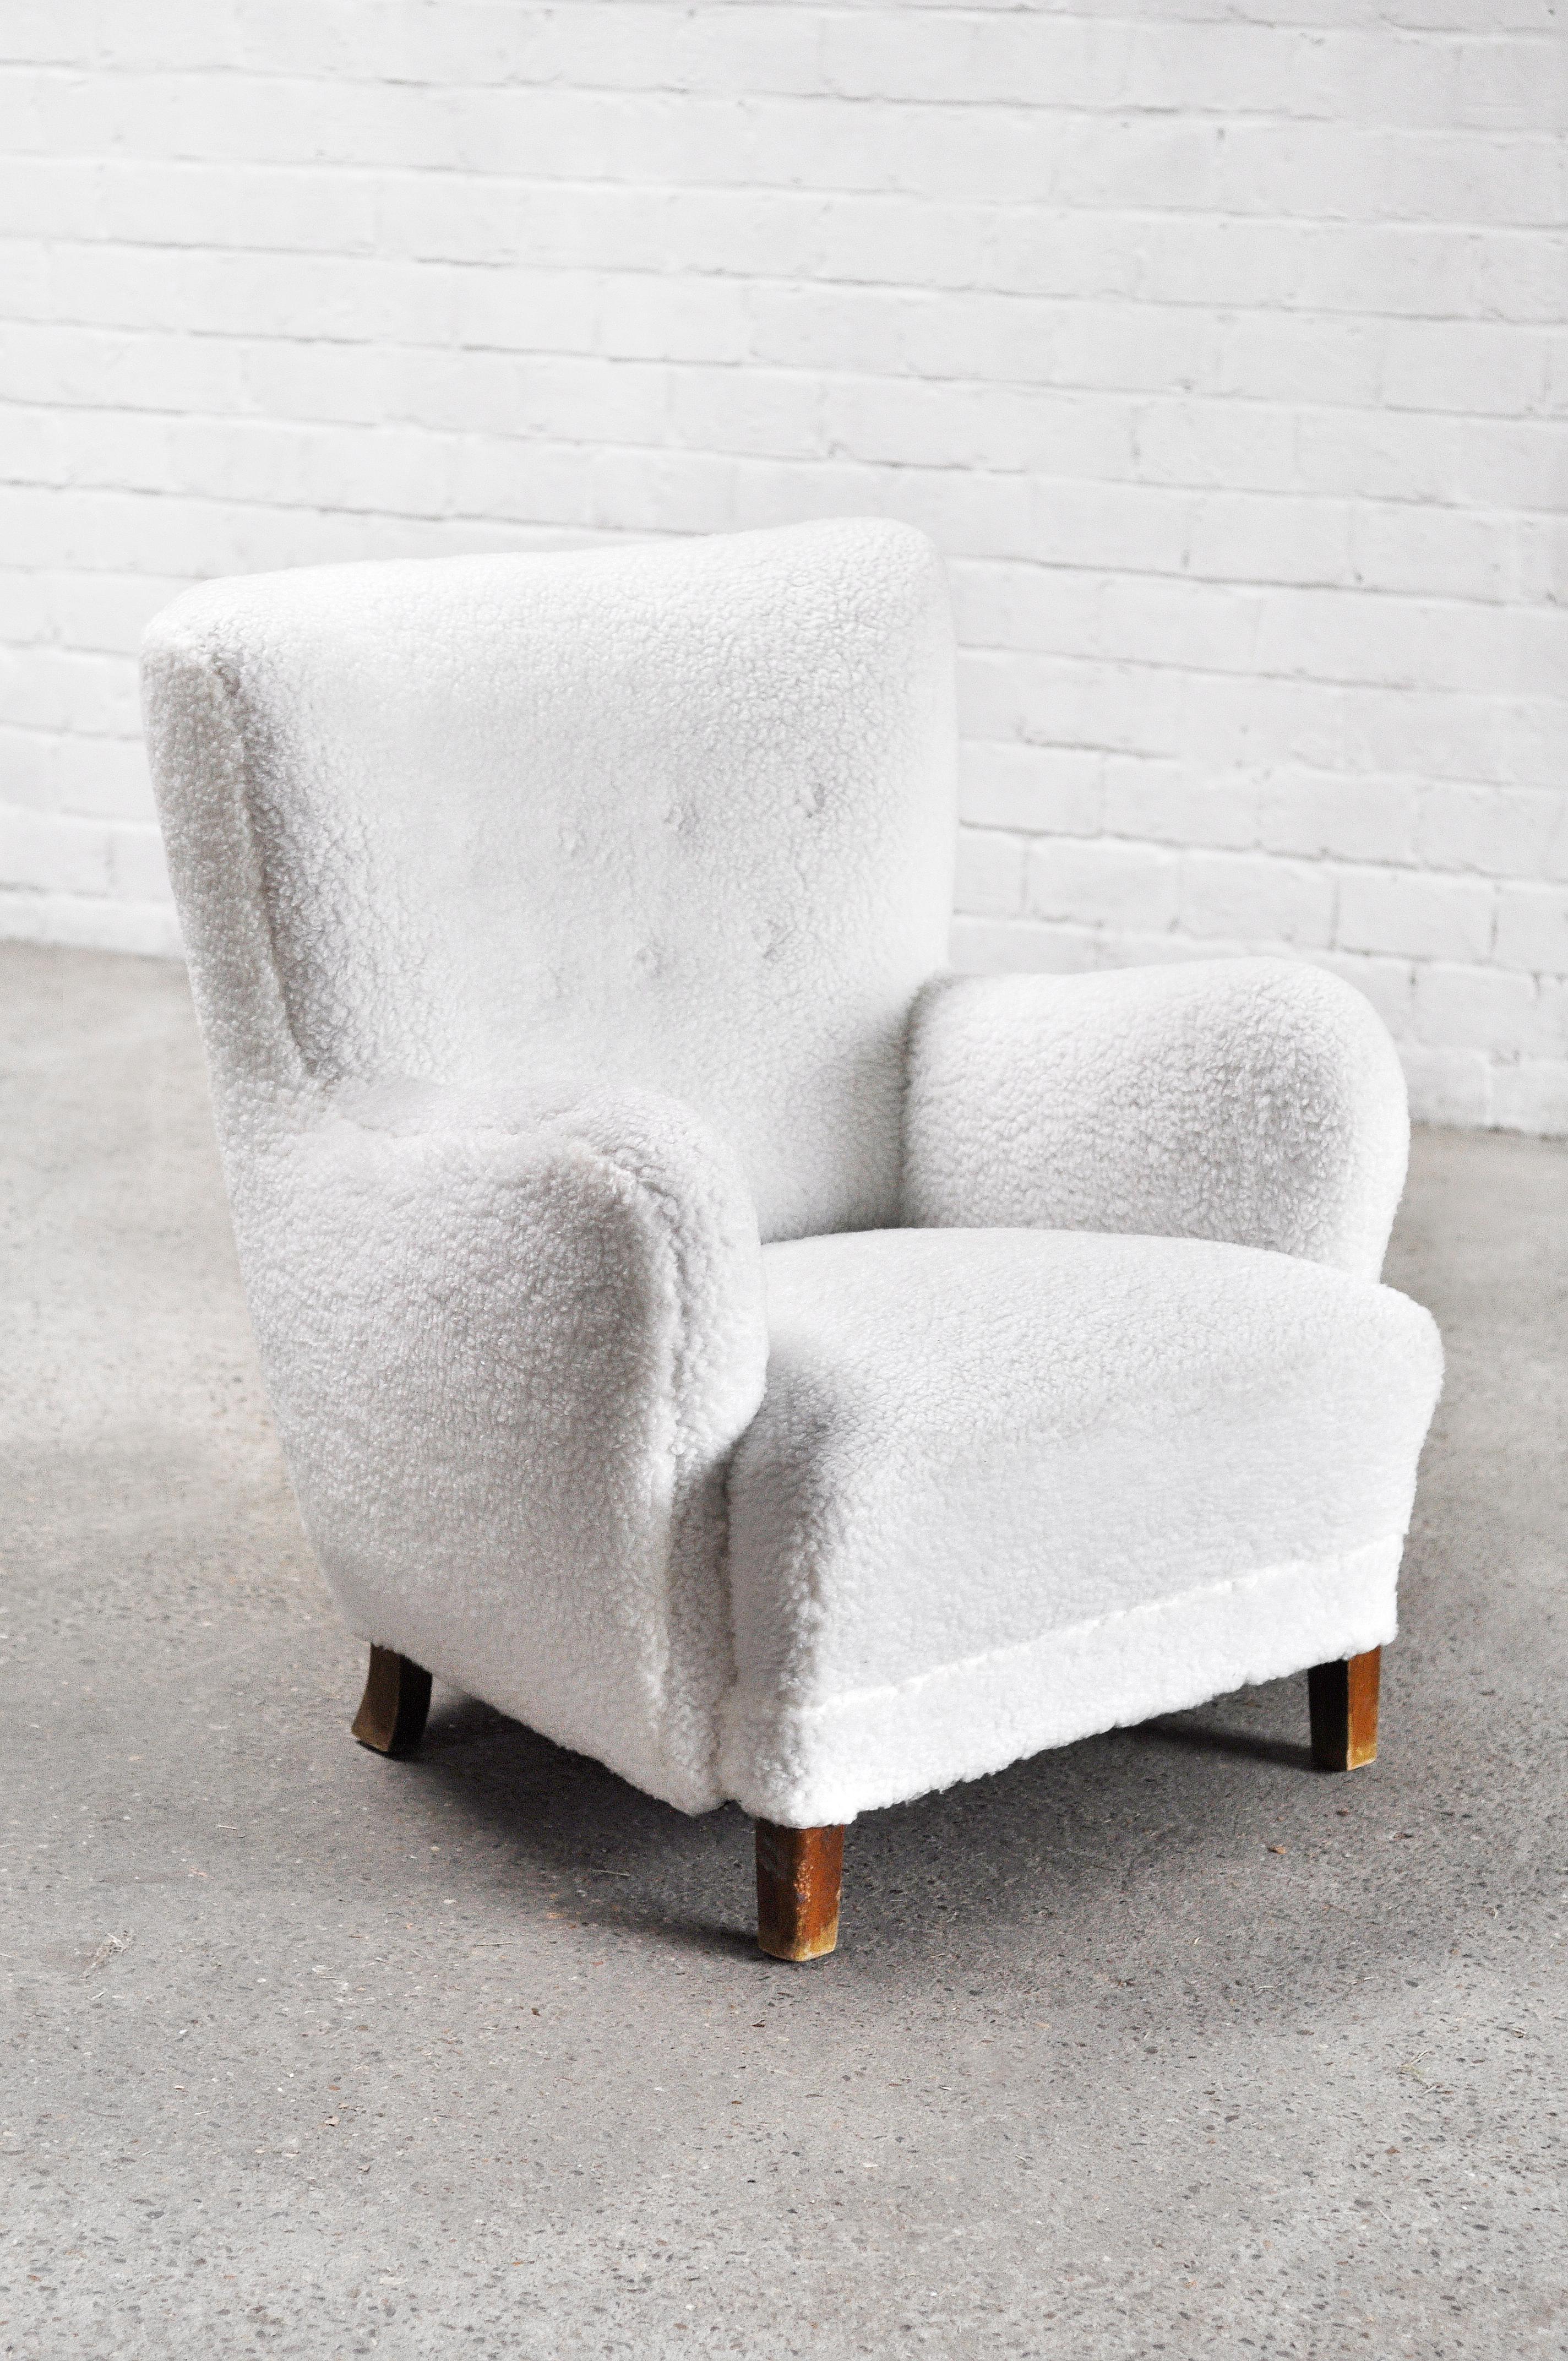 Iconic easy chair made by Fritz Hansen in the 1940's or early 1950's. This model is rarely seen and one of the 1669 variants. It was newly upholstered in a shearling white wool and has sculptural legs of stained beech. Sits very